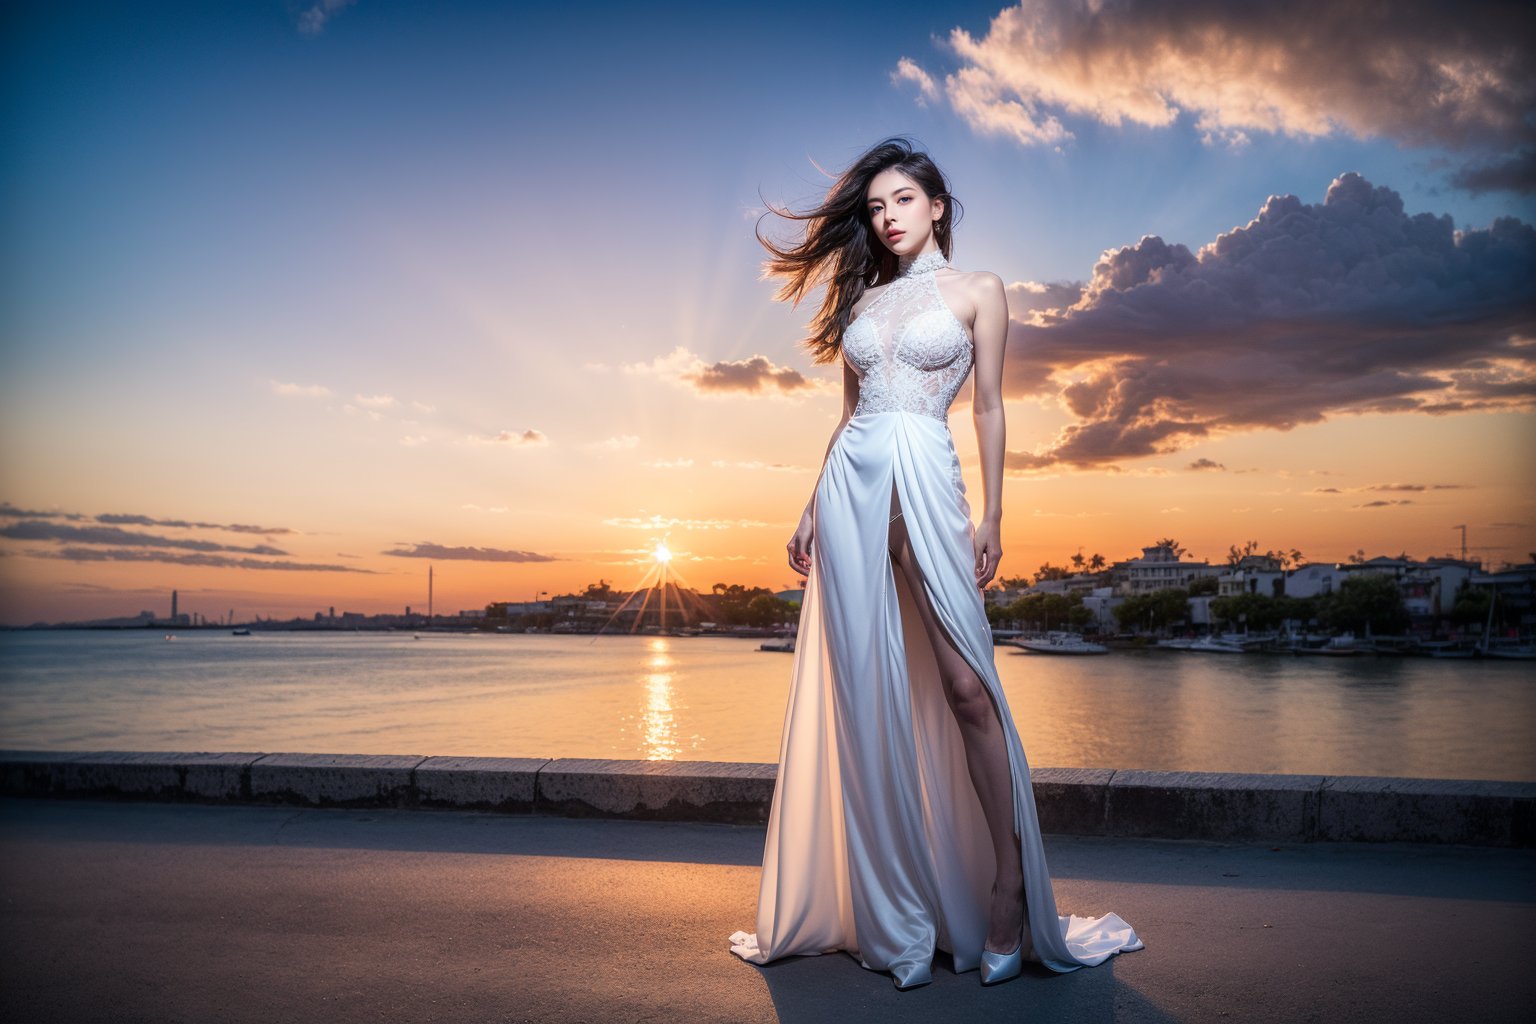 ((Full-Body)), 1female hot model, black hair, wearing ((a white youth dress)), full detail, perfect viewpoint, highly detailed, wide-angle lens, hyper realistic, with dramatic sky, polarizing filter, natural lighting, vivid colors, sunset,